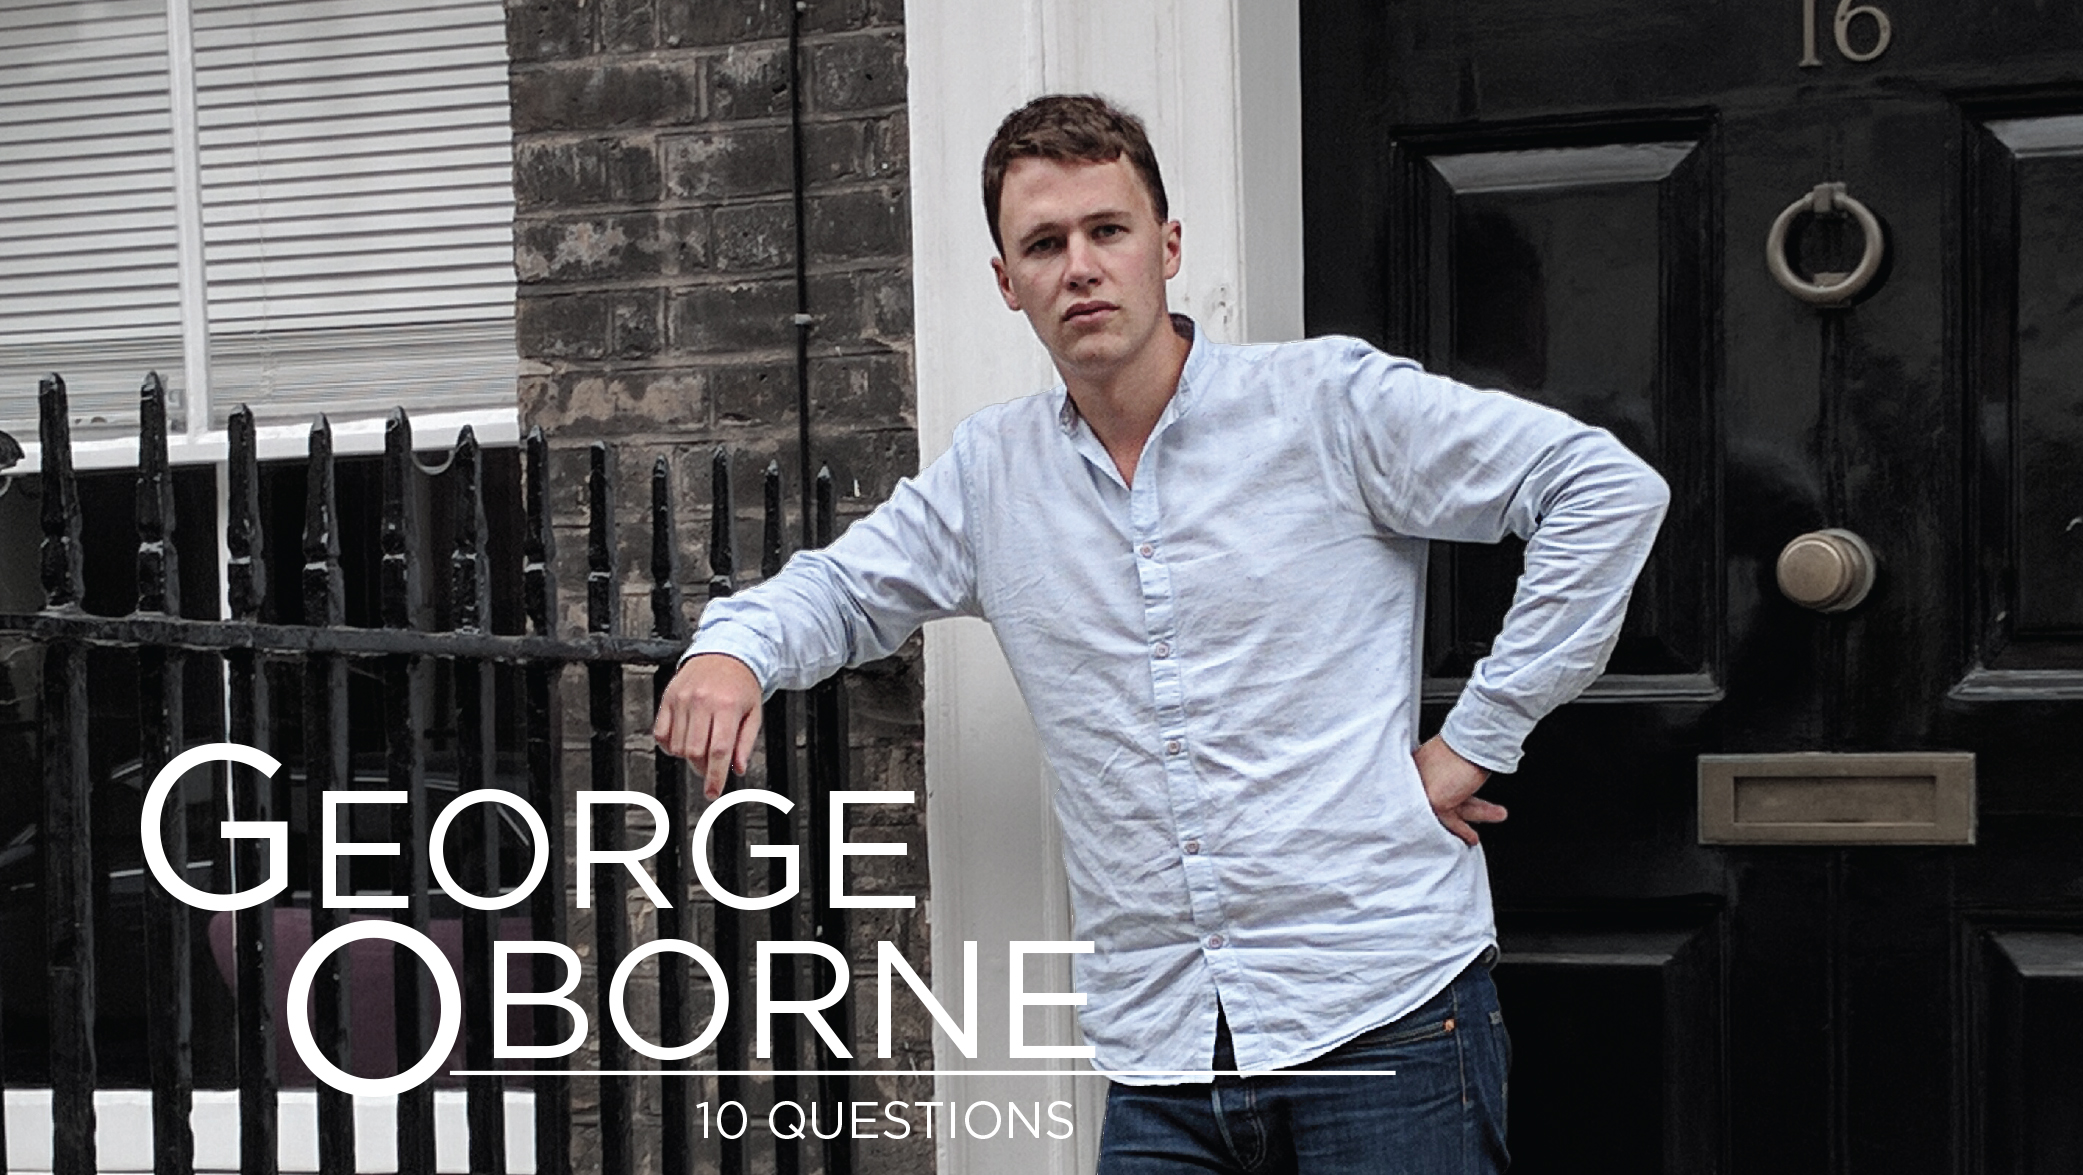 10 Questions - George Oborne